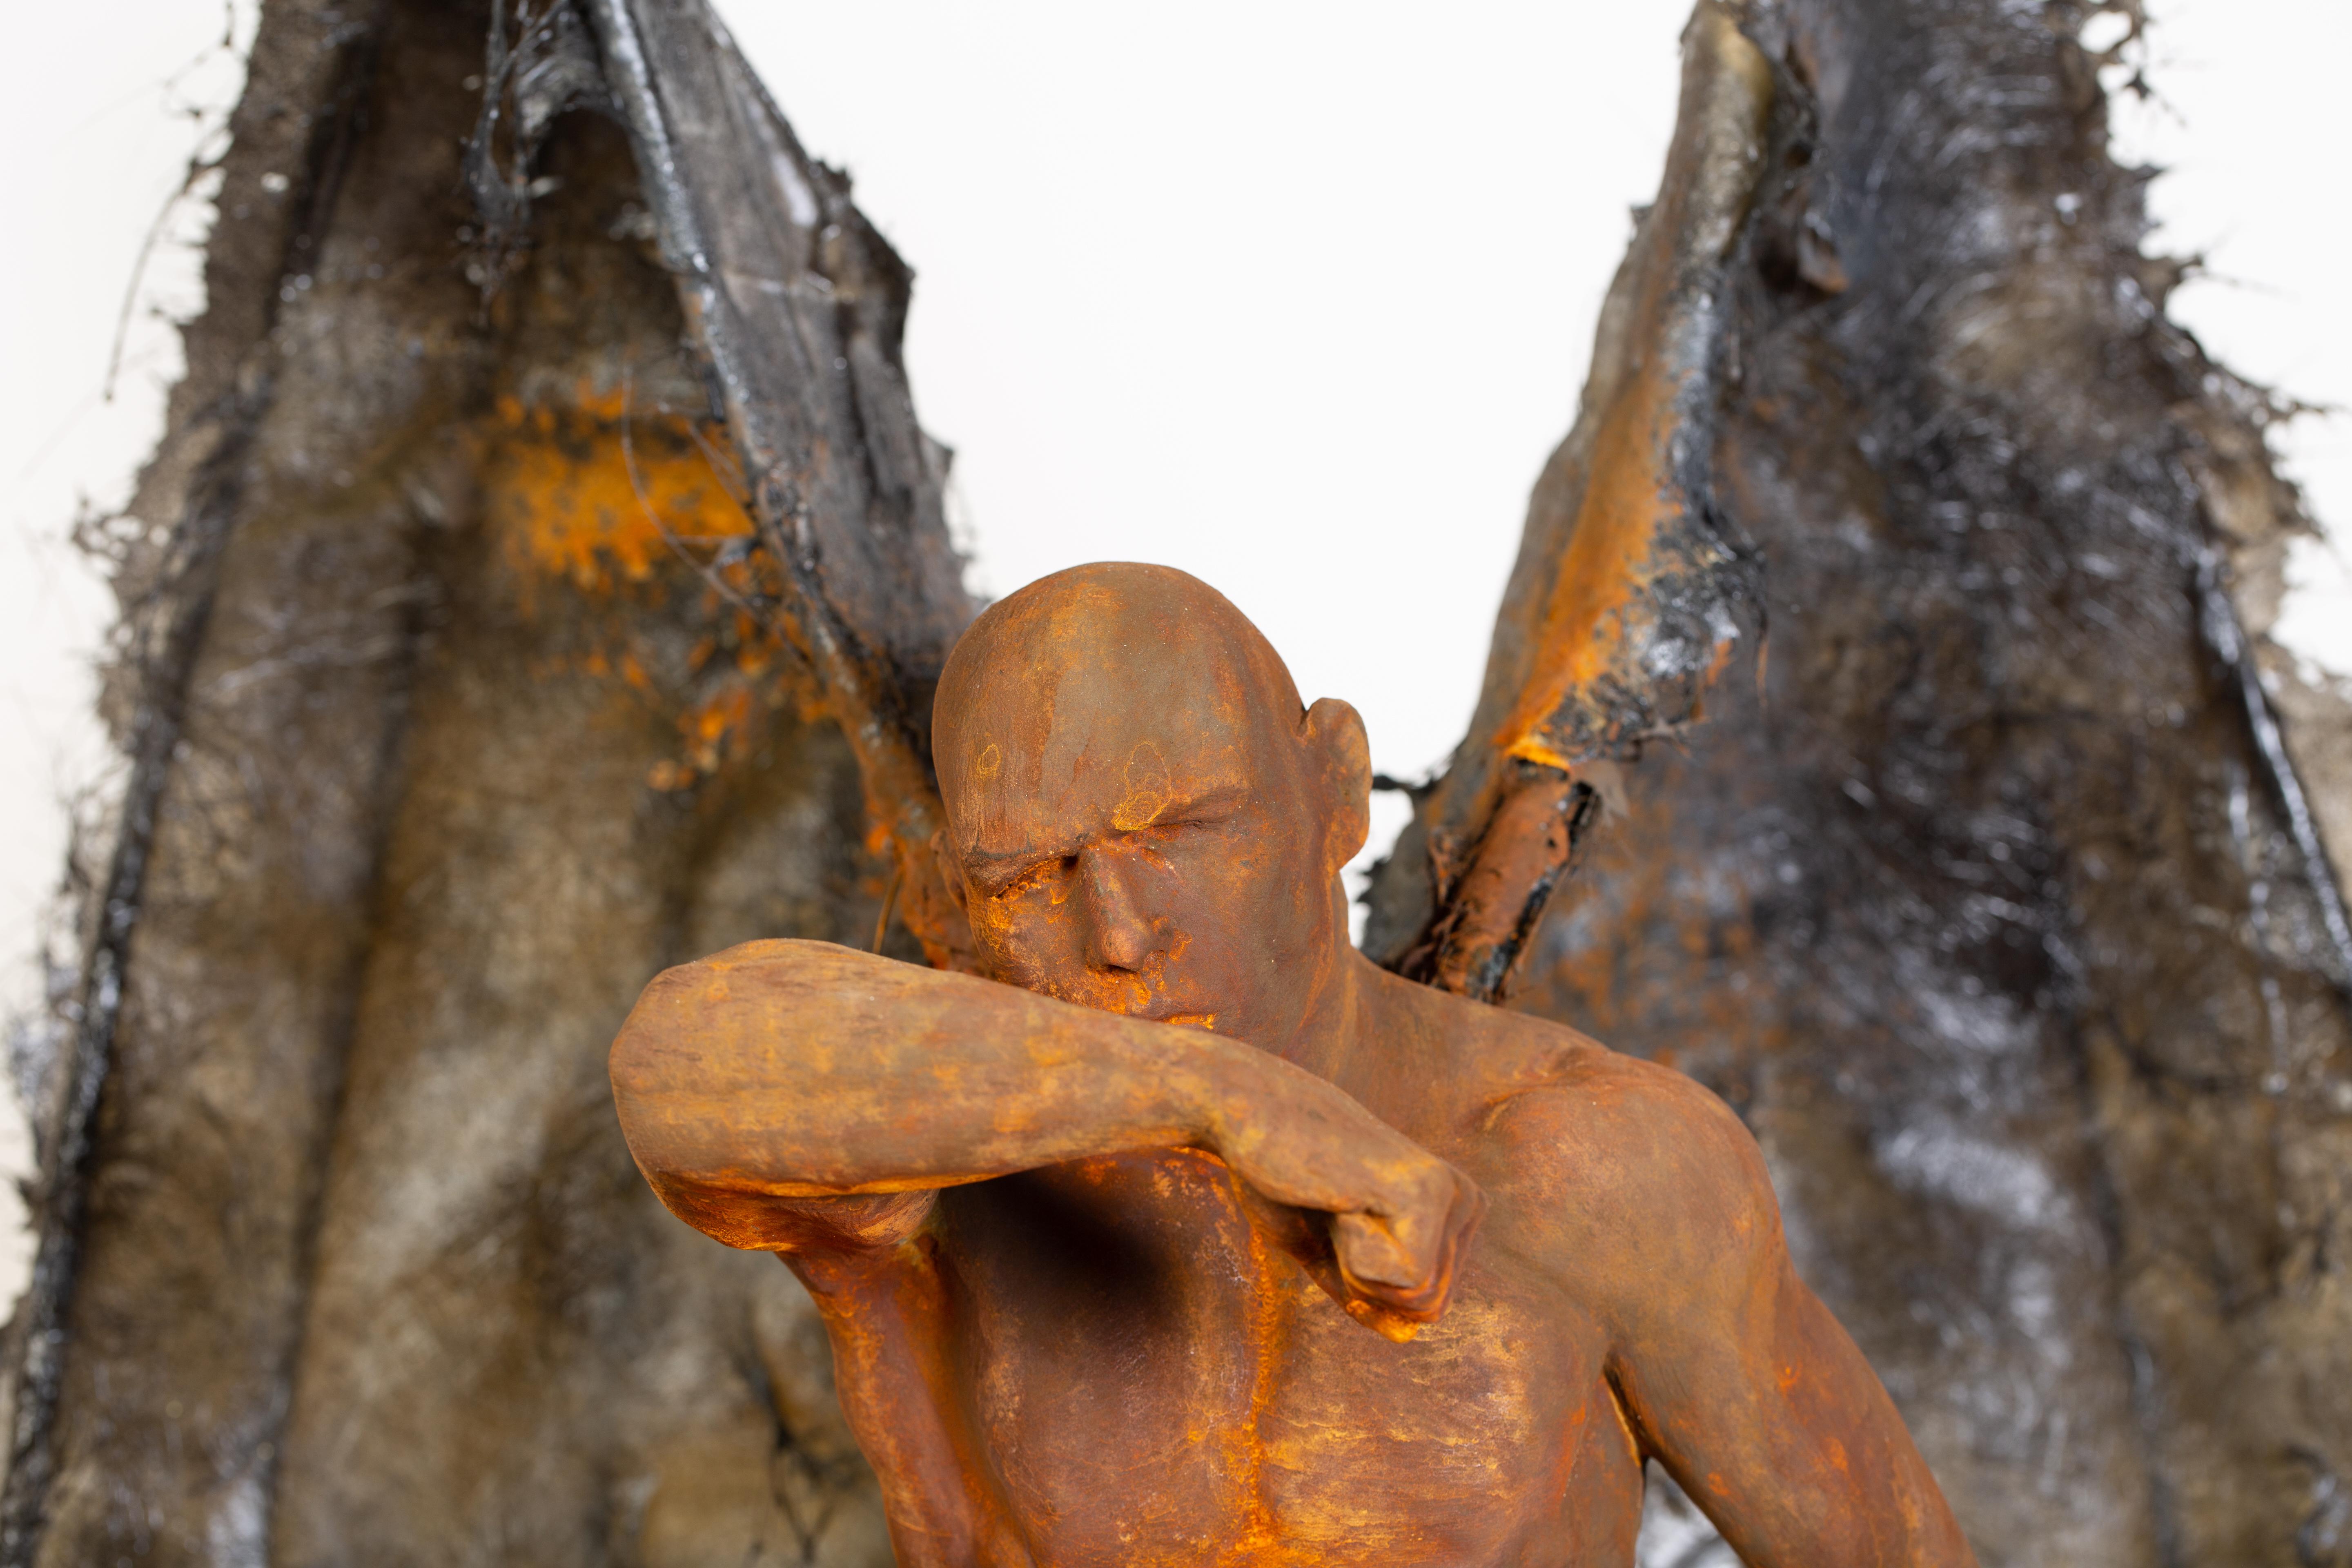 Guardian: Obscura - Winged, Bronze, Mixed Media Sculpture, Rust and Iron Patina - Brown Nude Sculpture by Dean Kugler